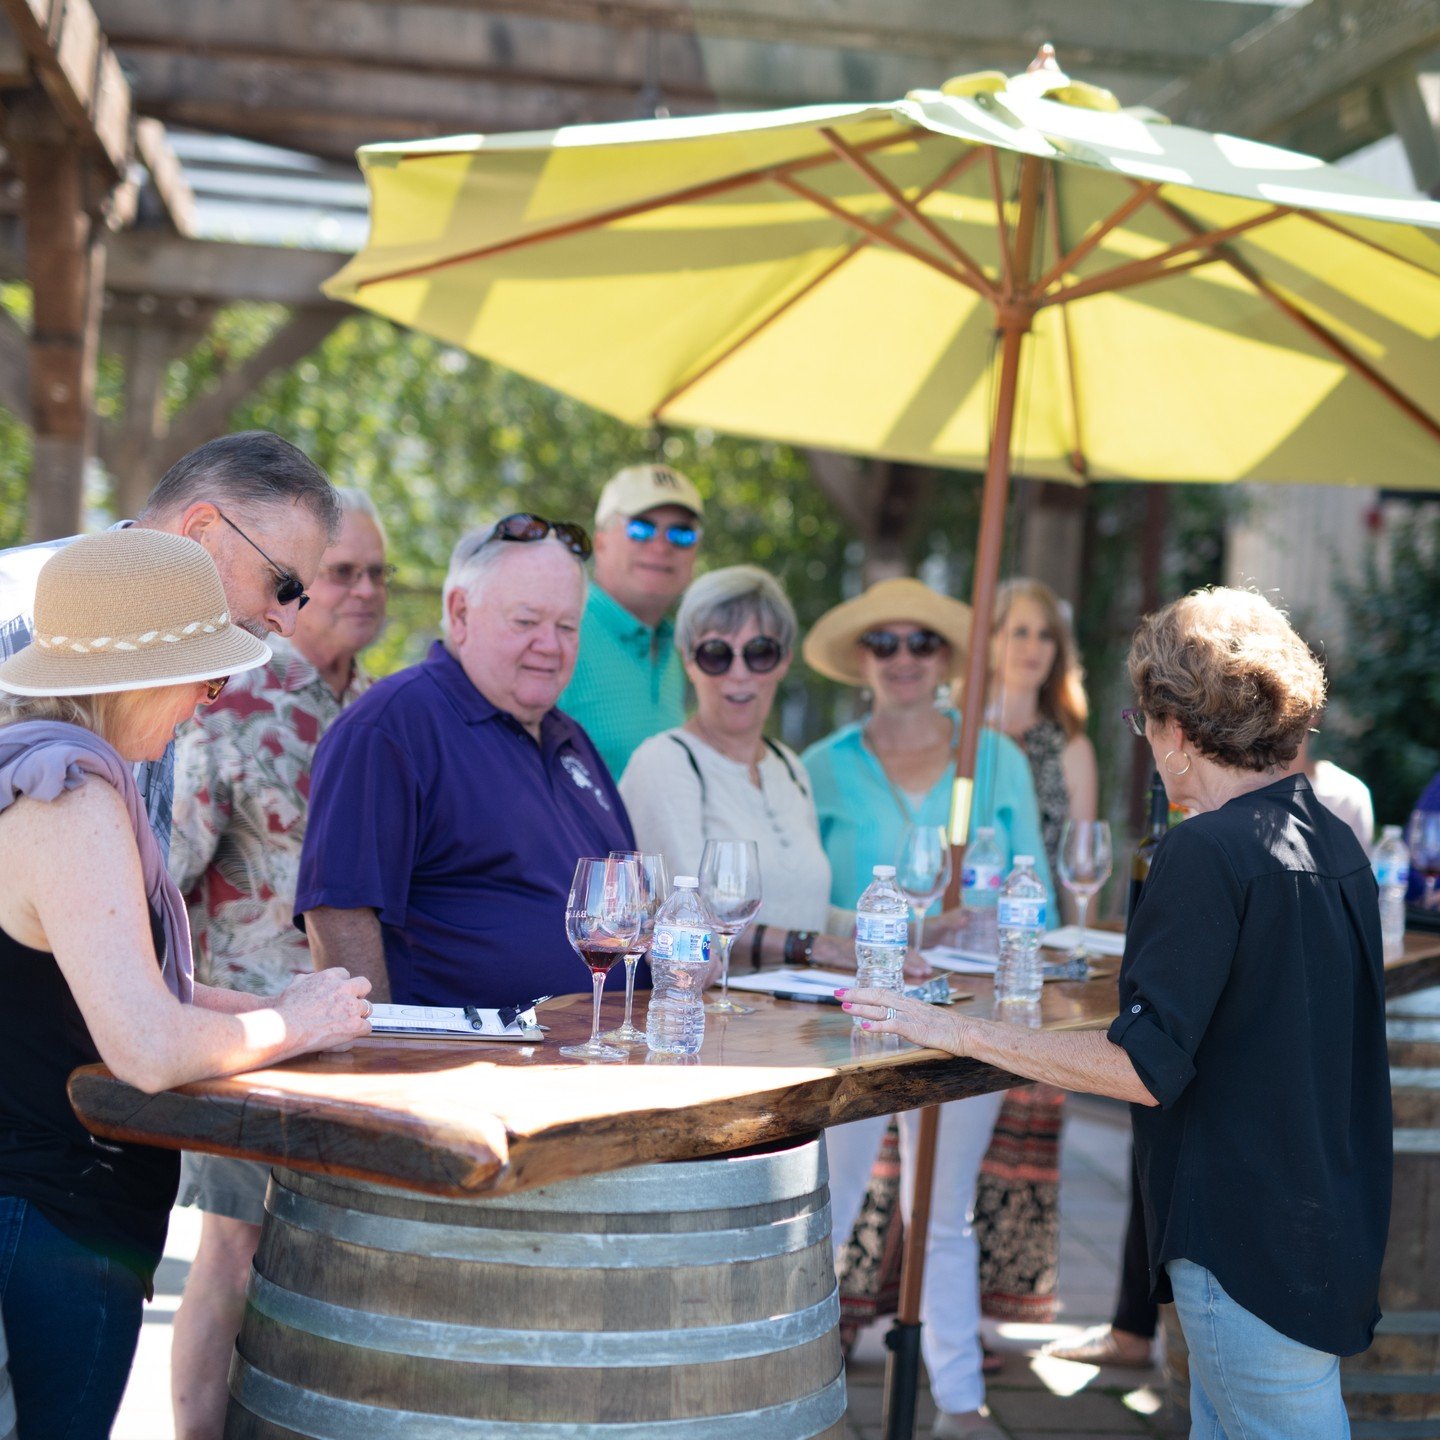 Spring in Wine Country... A fantastic time of year to be here. Visit our Tasting Room, where walk-ins are always welcome! 

Open daily from 10am to 5pm, enjoy an open view of our vineyards, live music on the weekends, &amp; tasting wines made from th